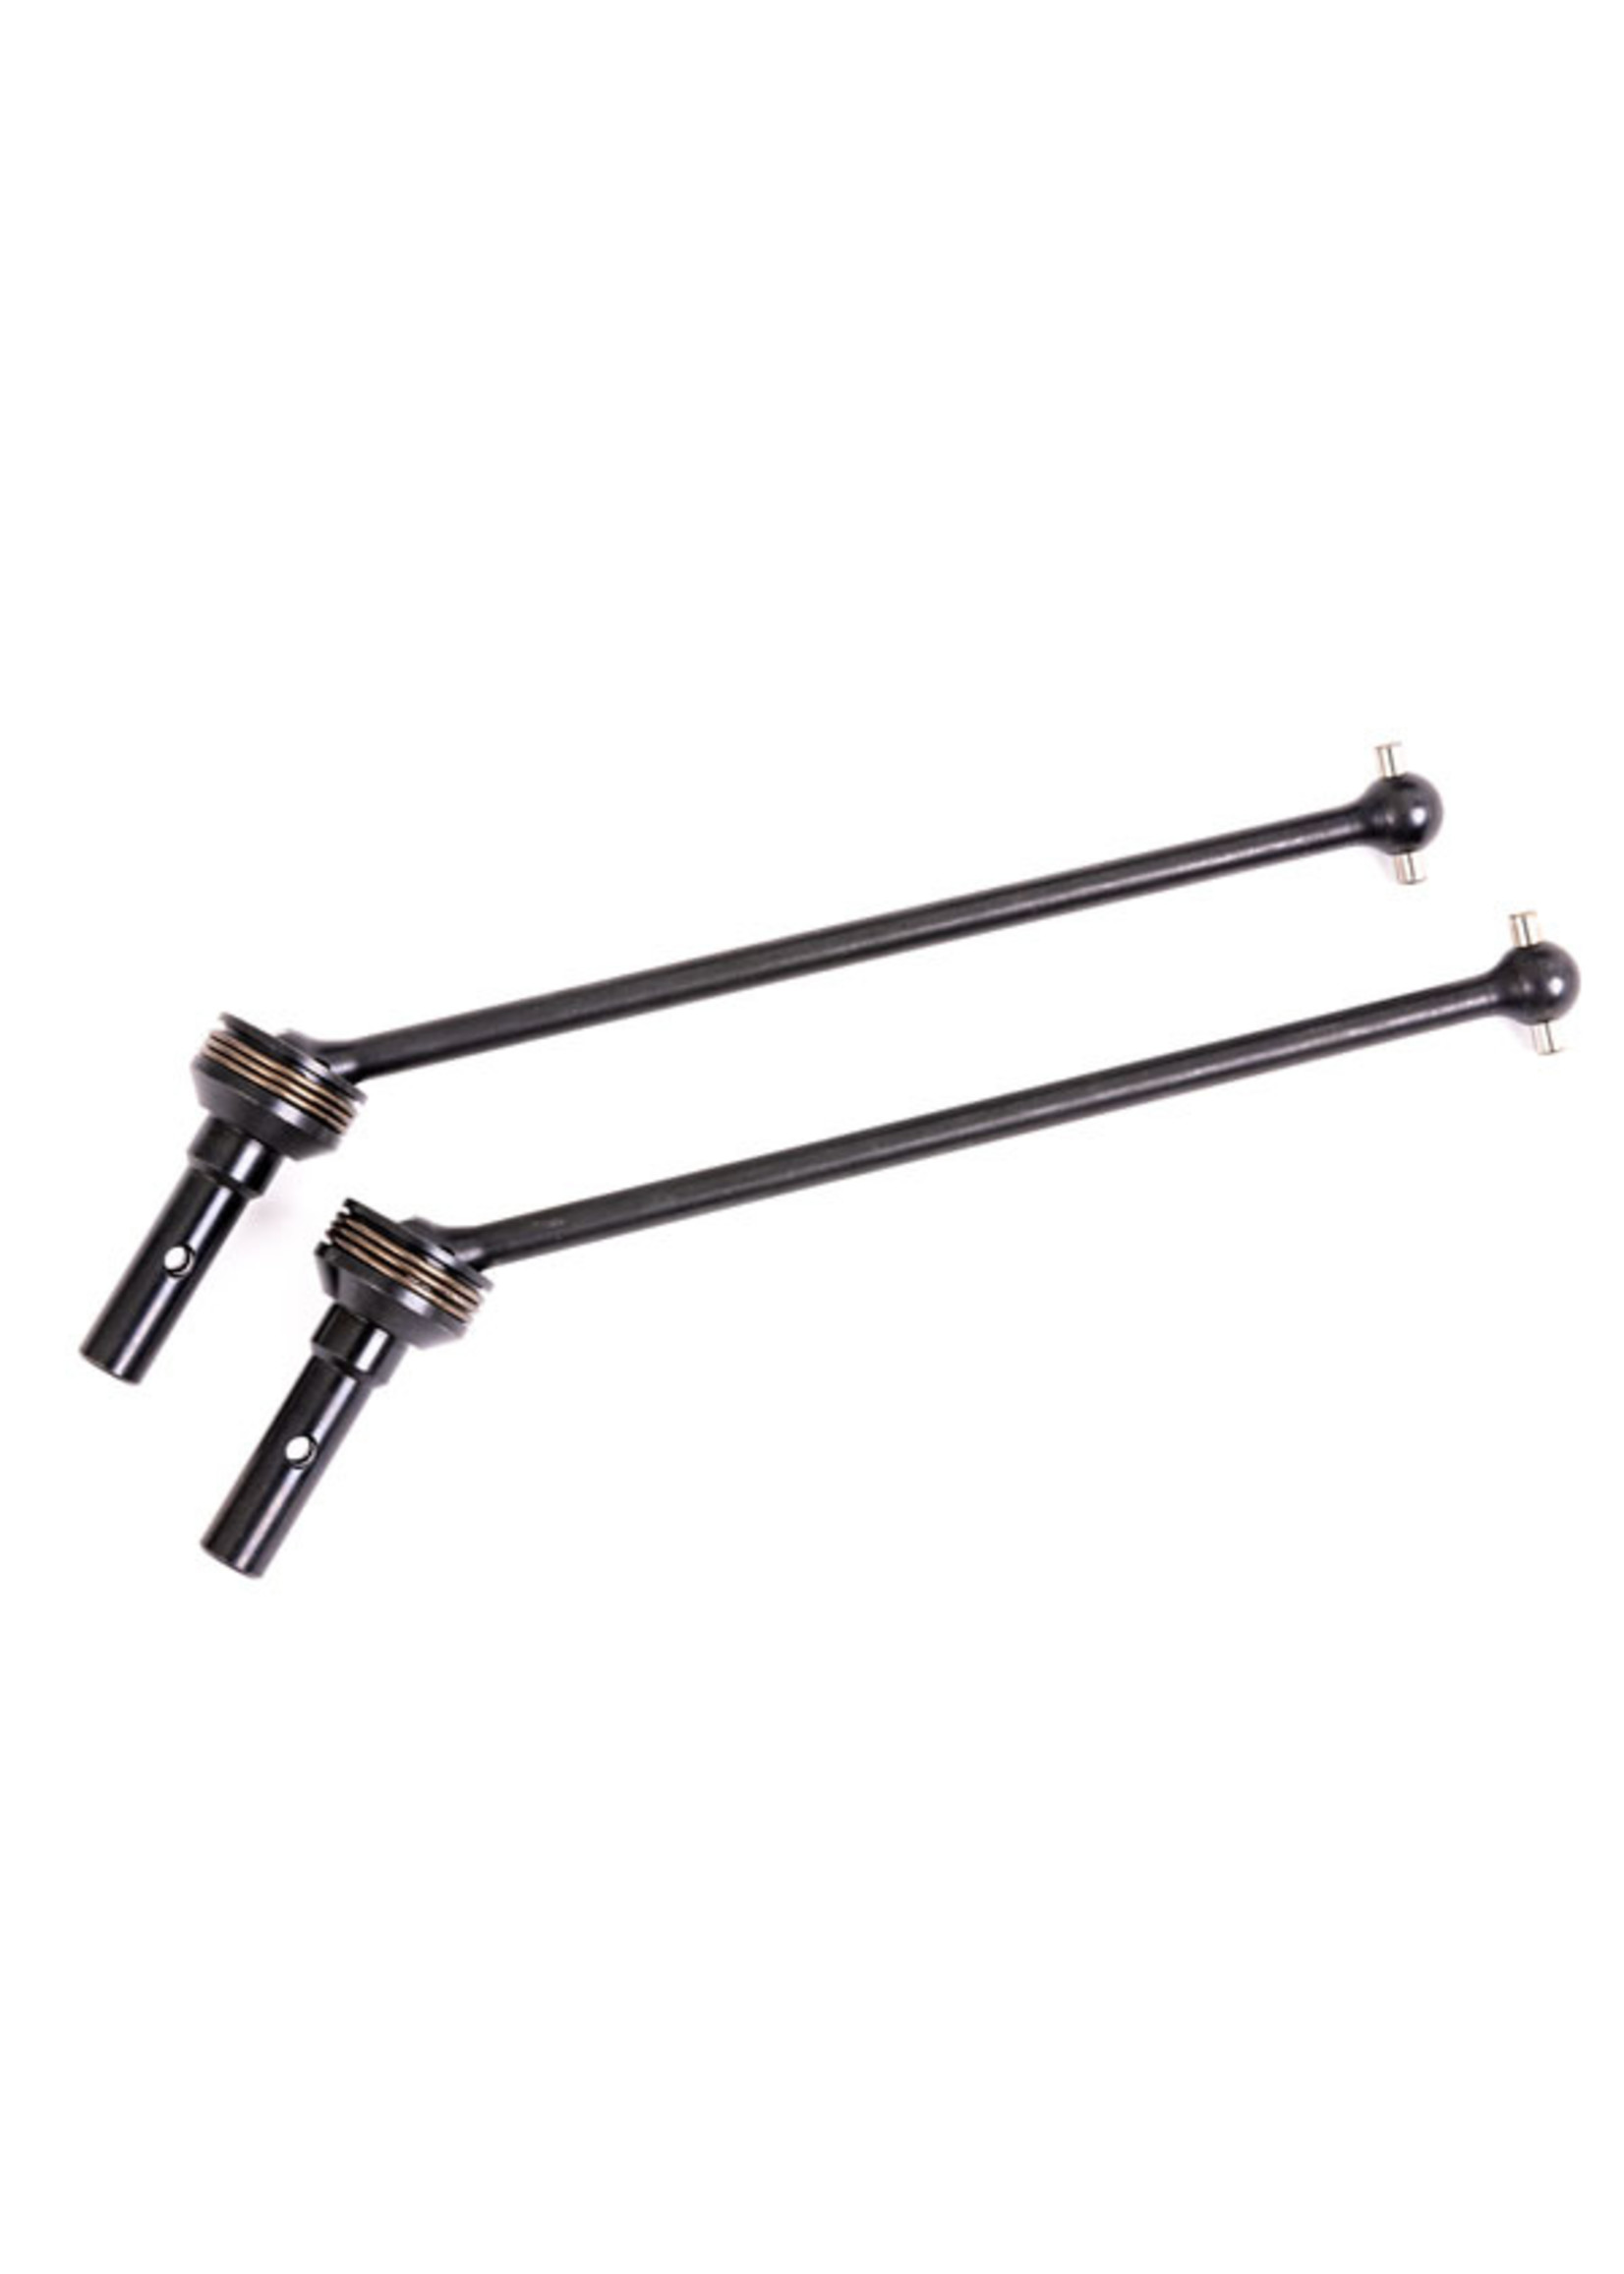 Traxxas 9654X - Complete Assembly Driveshaft, Rear